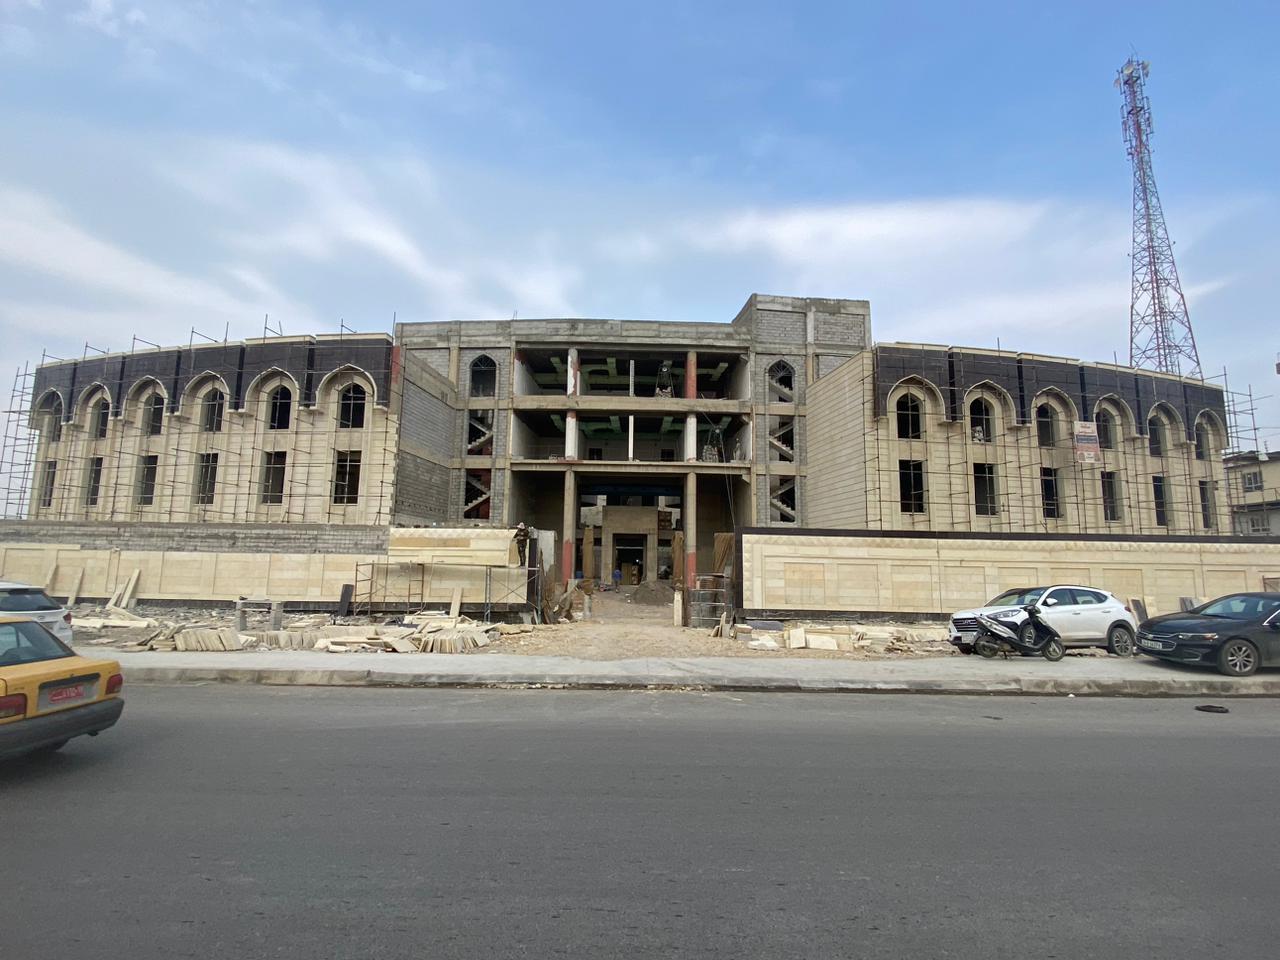 Visit of the General Director of the Planning Buildings Project in Nineveh Governorate